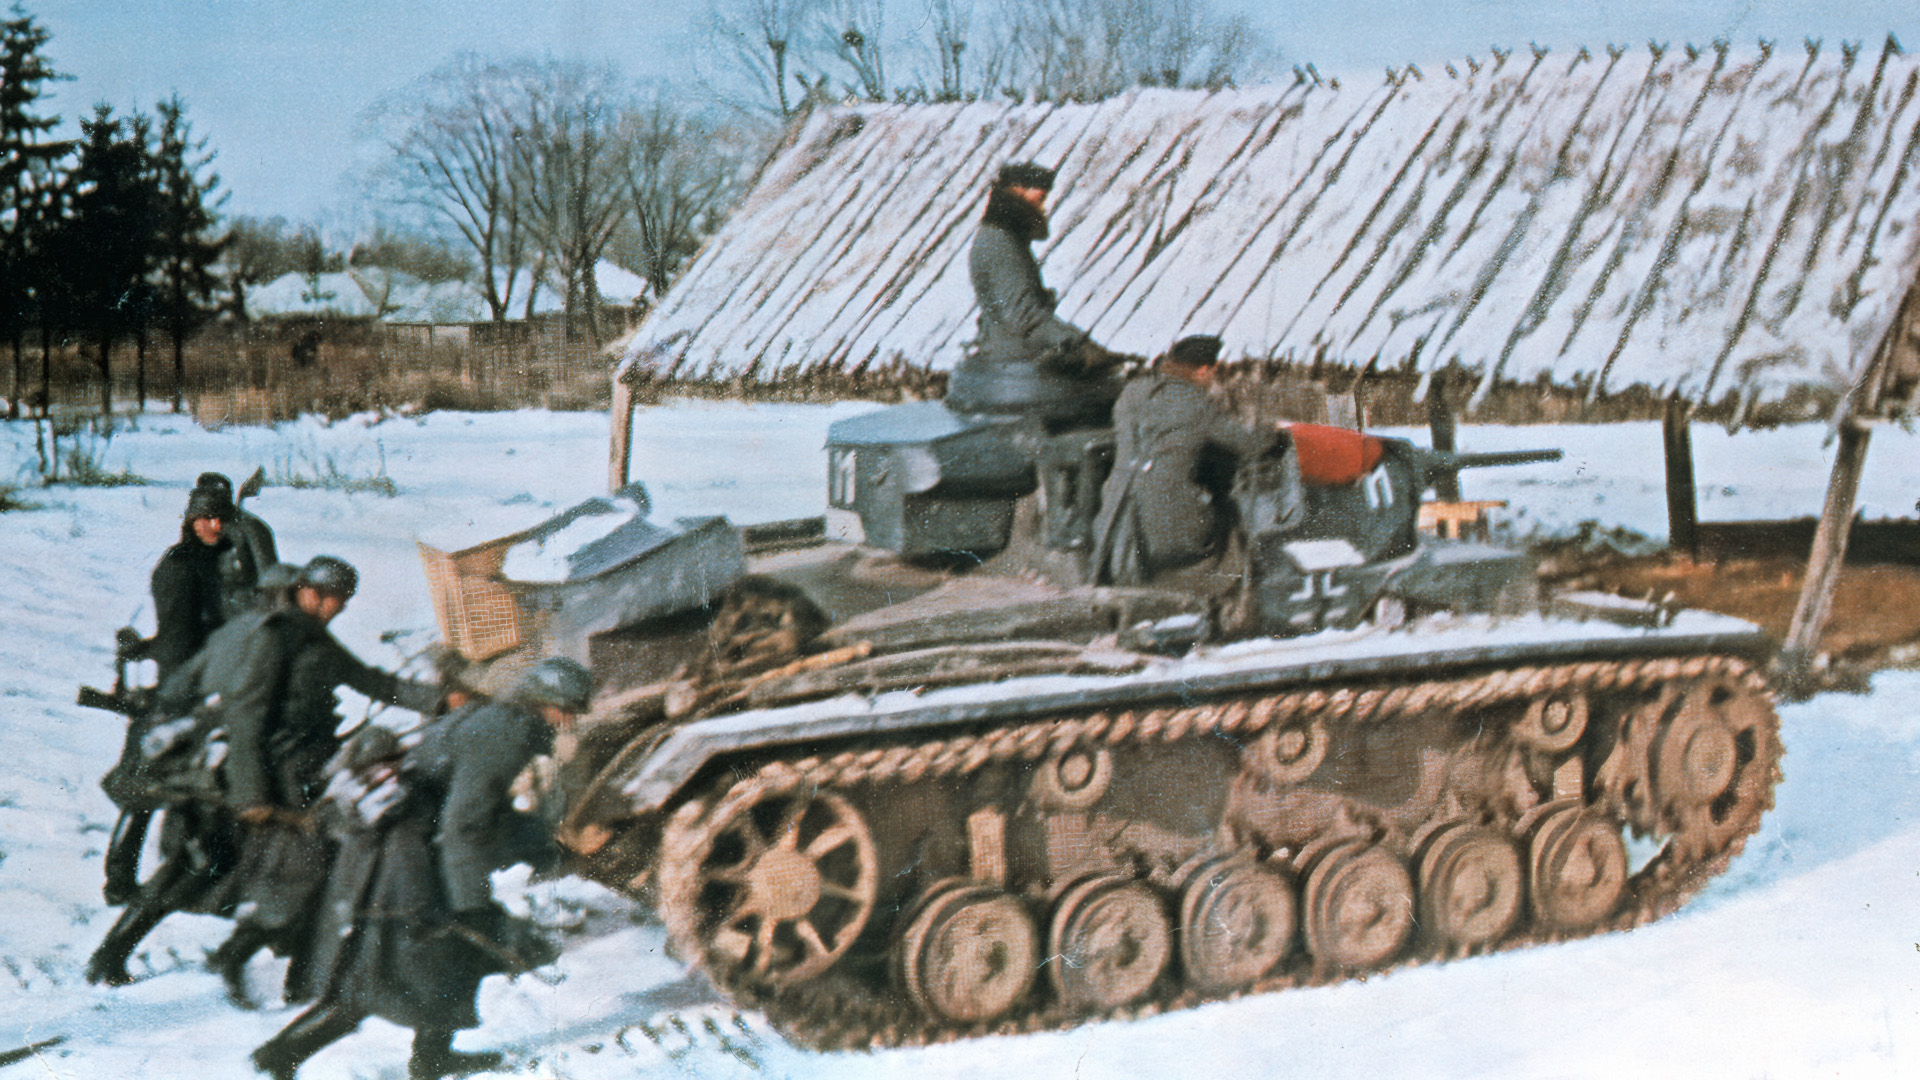 German soldiers and tanks on the offensive in Russia during the winter of 1942 move across the snowy landscape of a Russian village. This photo first appeared in Signal, a magazine published for members of the German military.